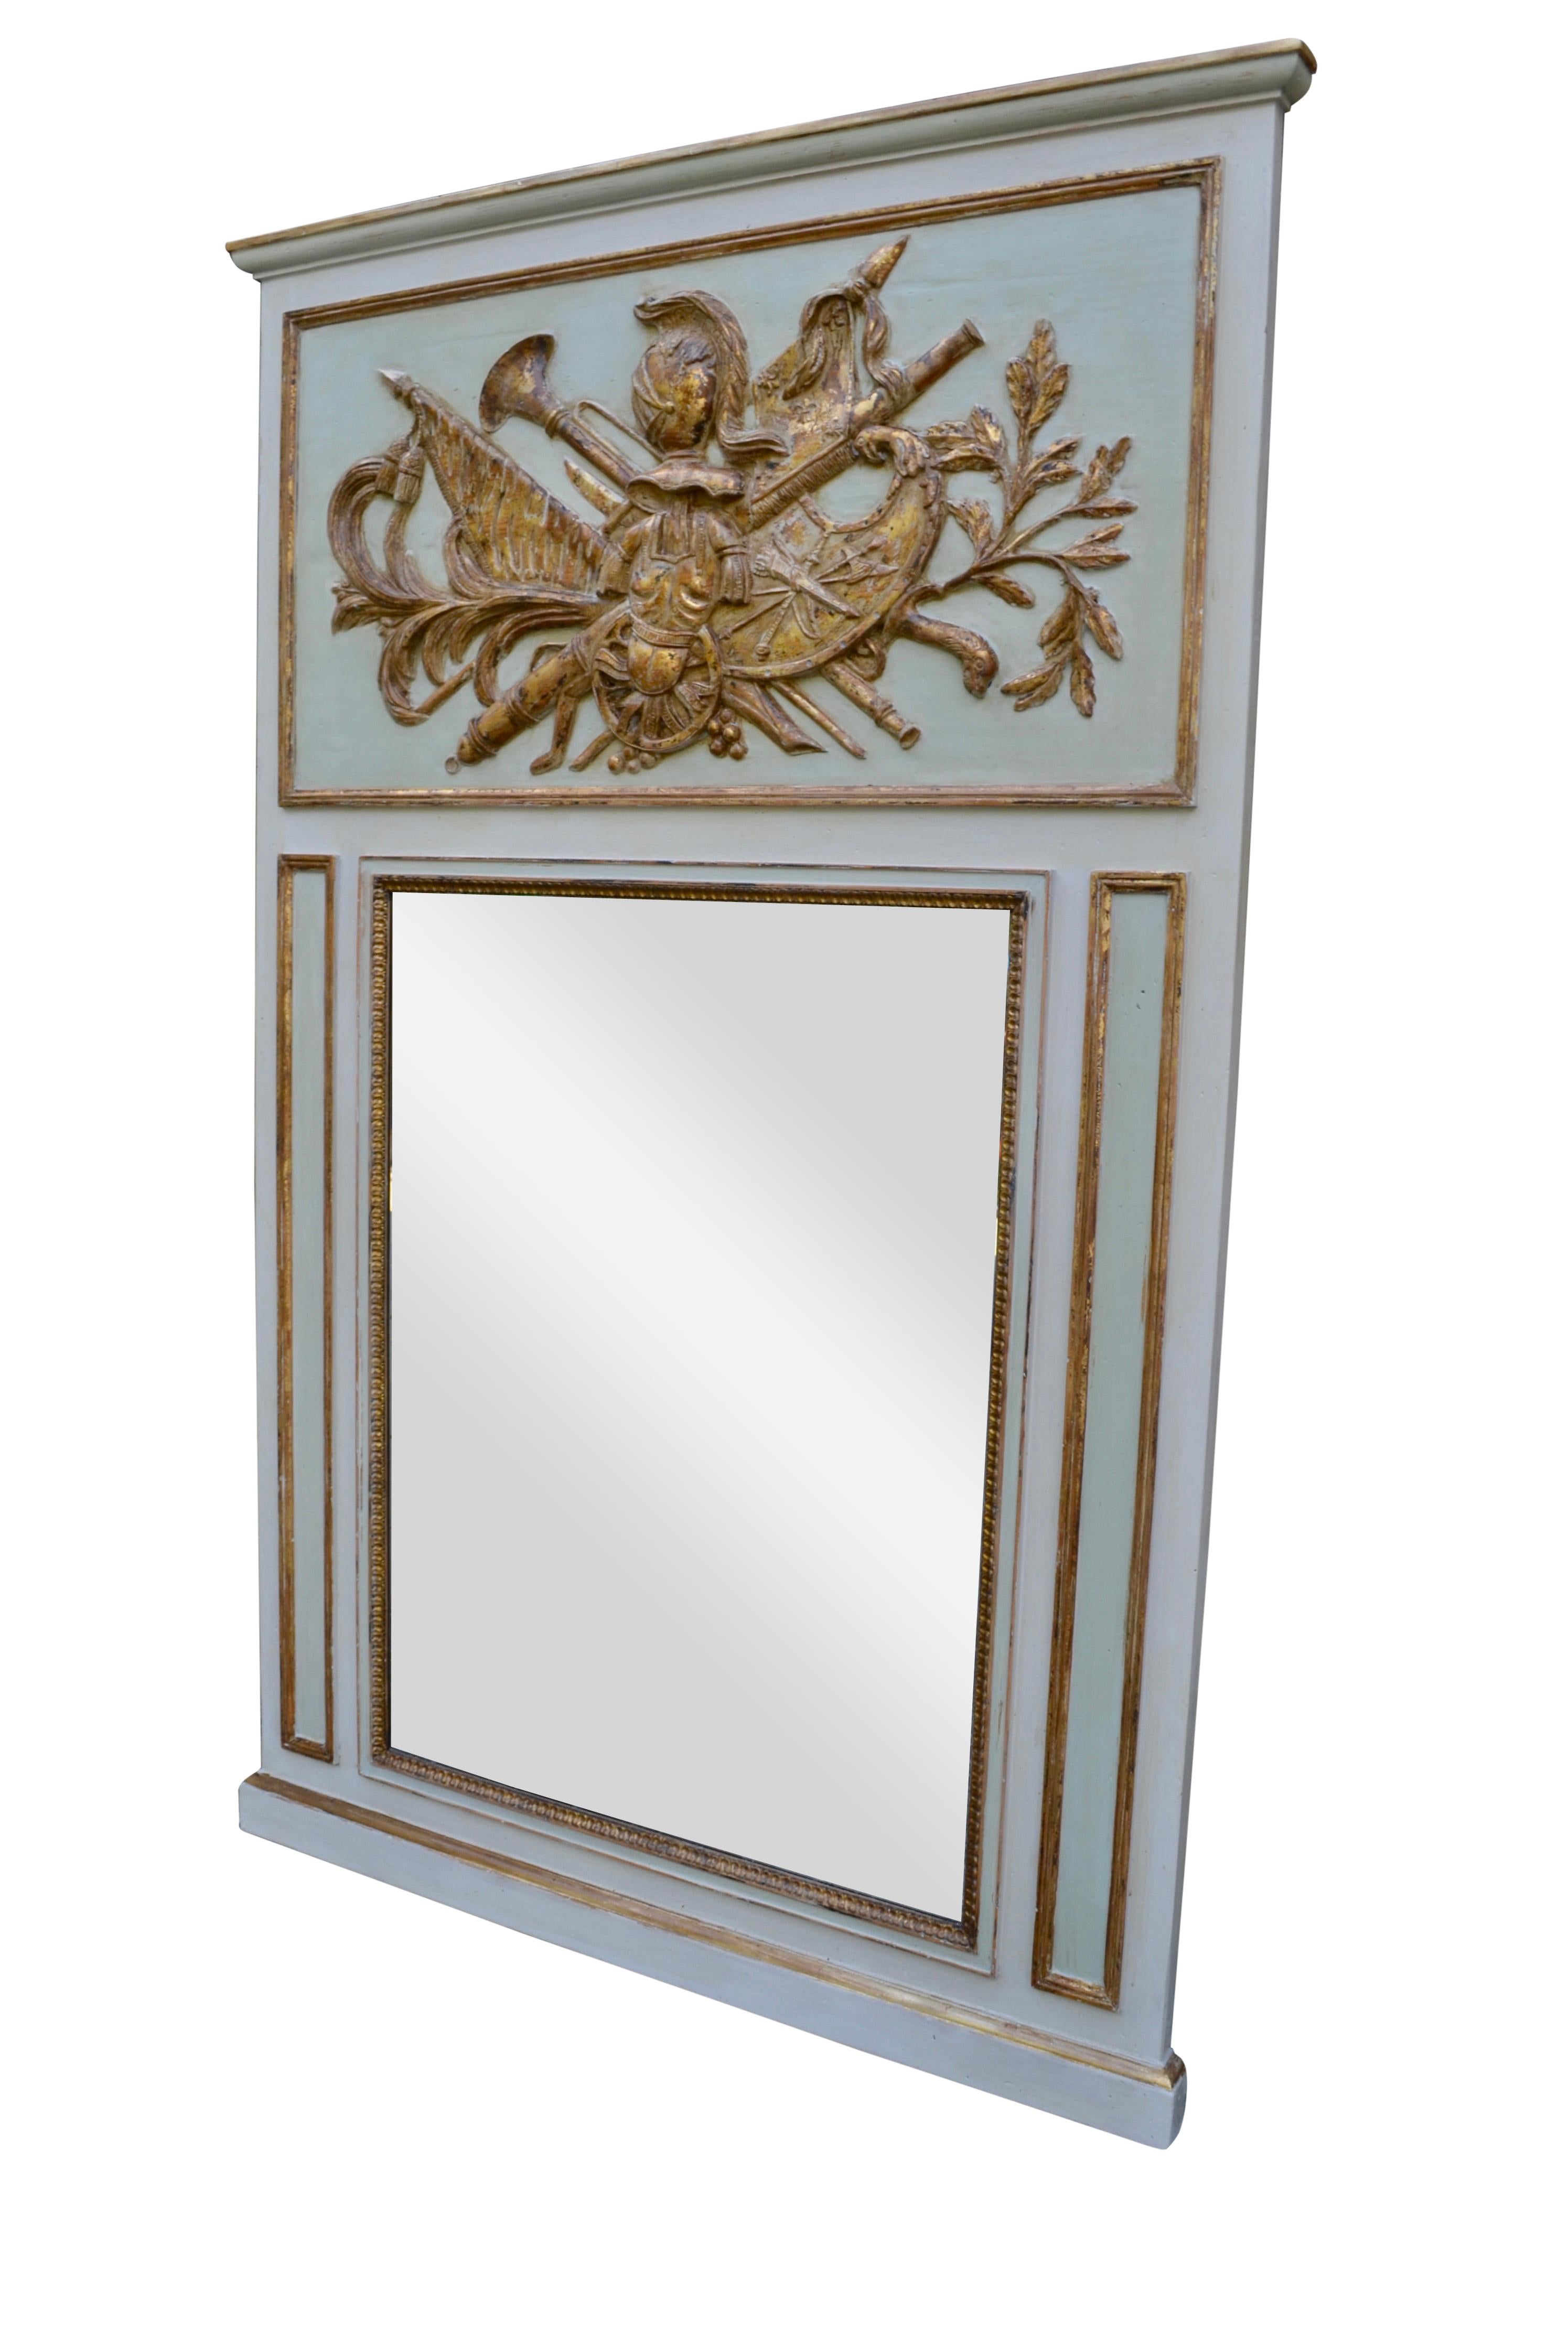 Louis XVI Style Painted Console and Mirror In Good Condition For Sale In Vancouver, British Columbia